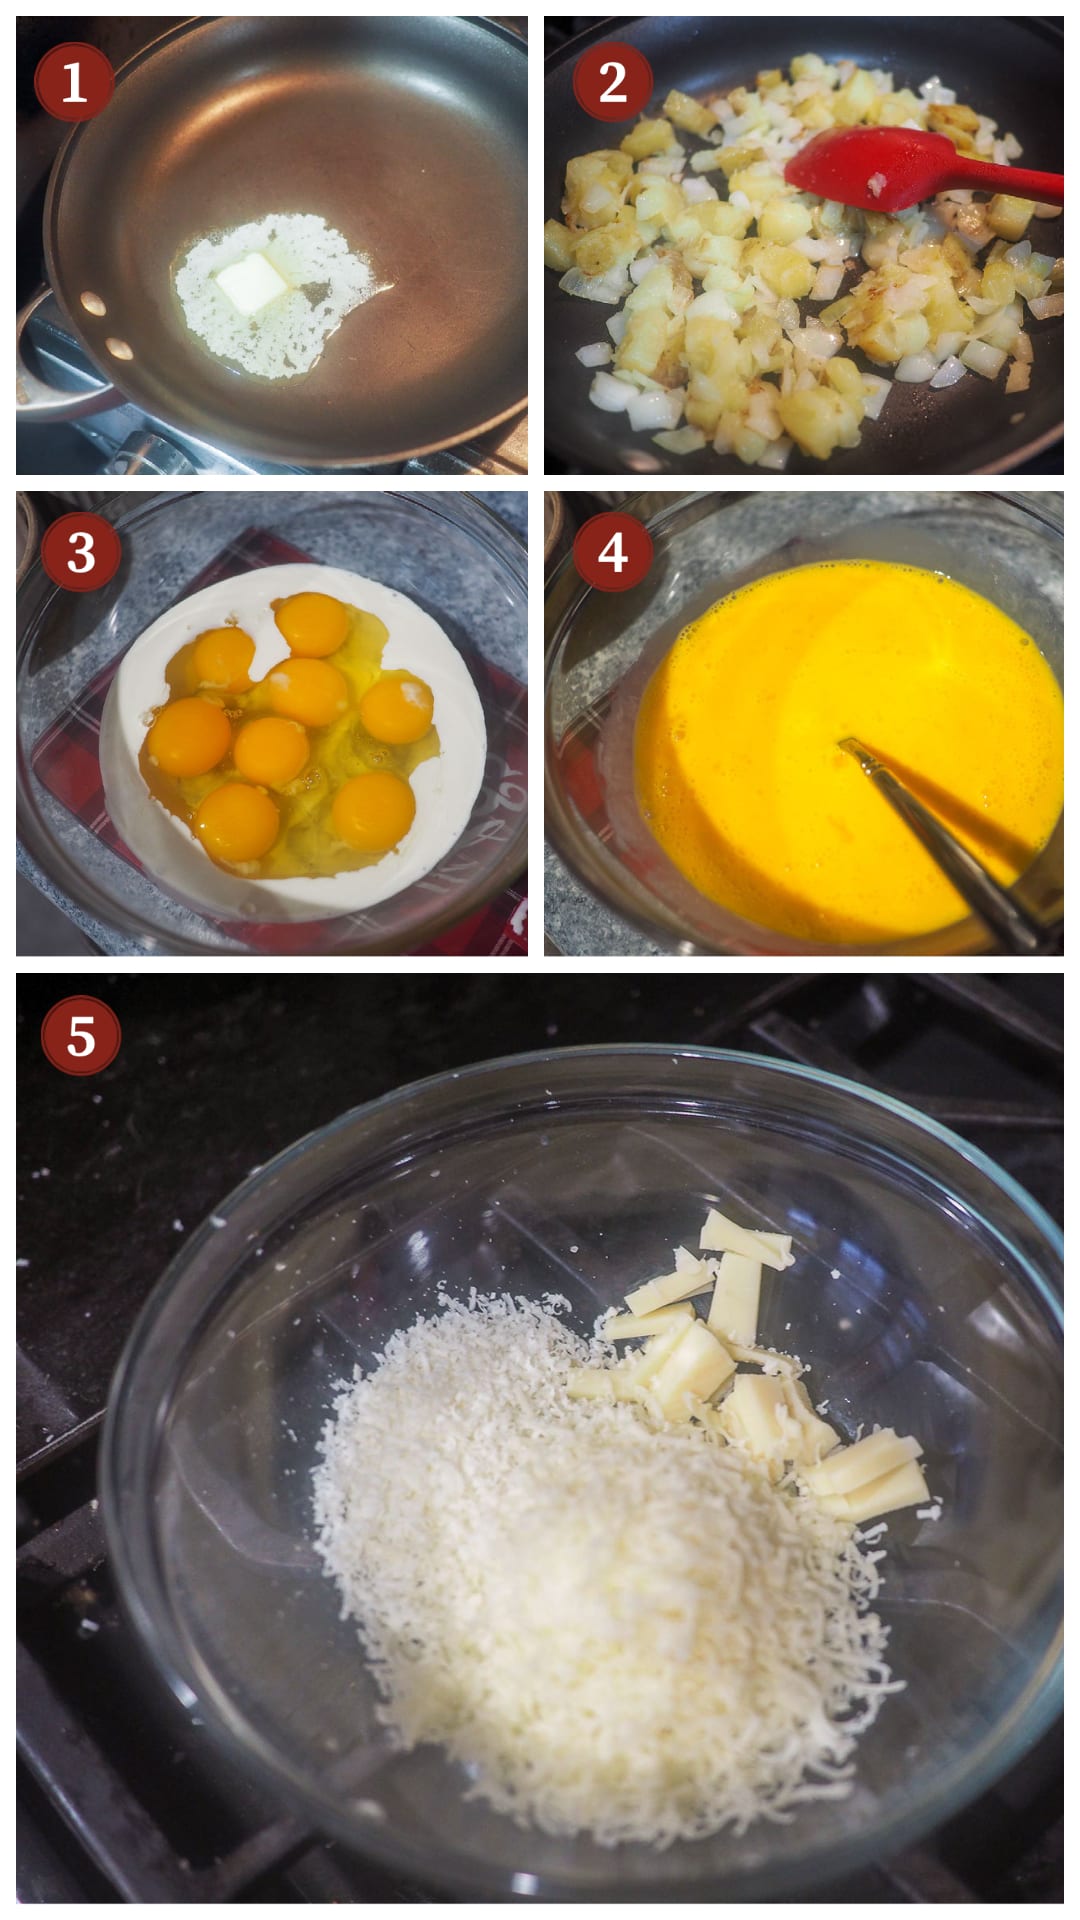 A collage of images showing how to make a ham and cheese frittata, steps 1 - 5.